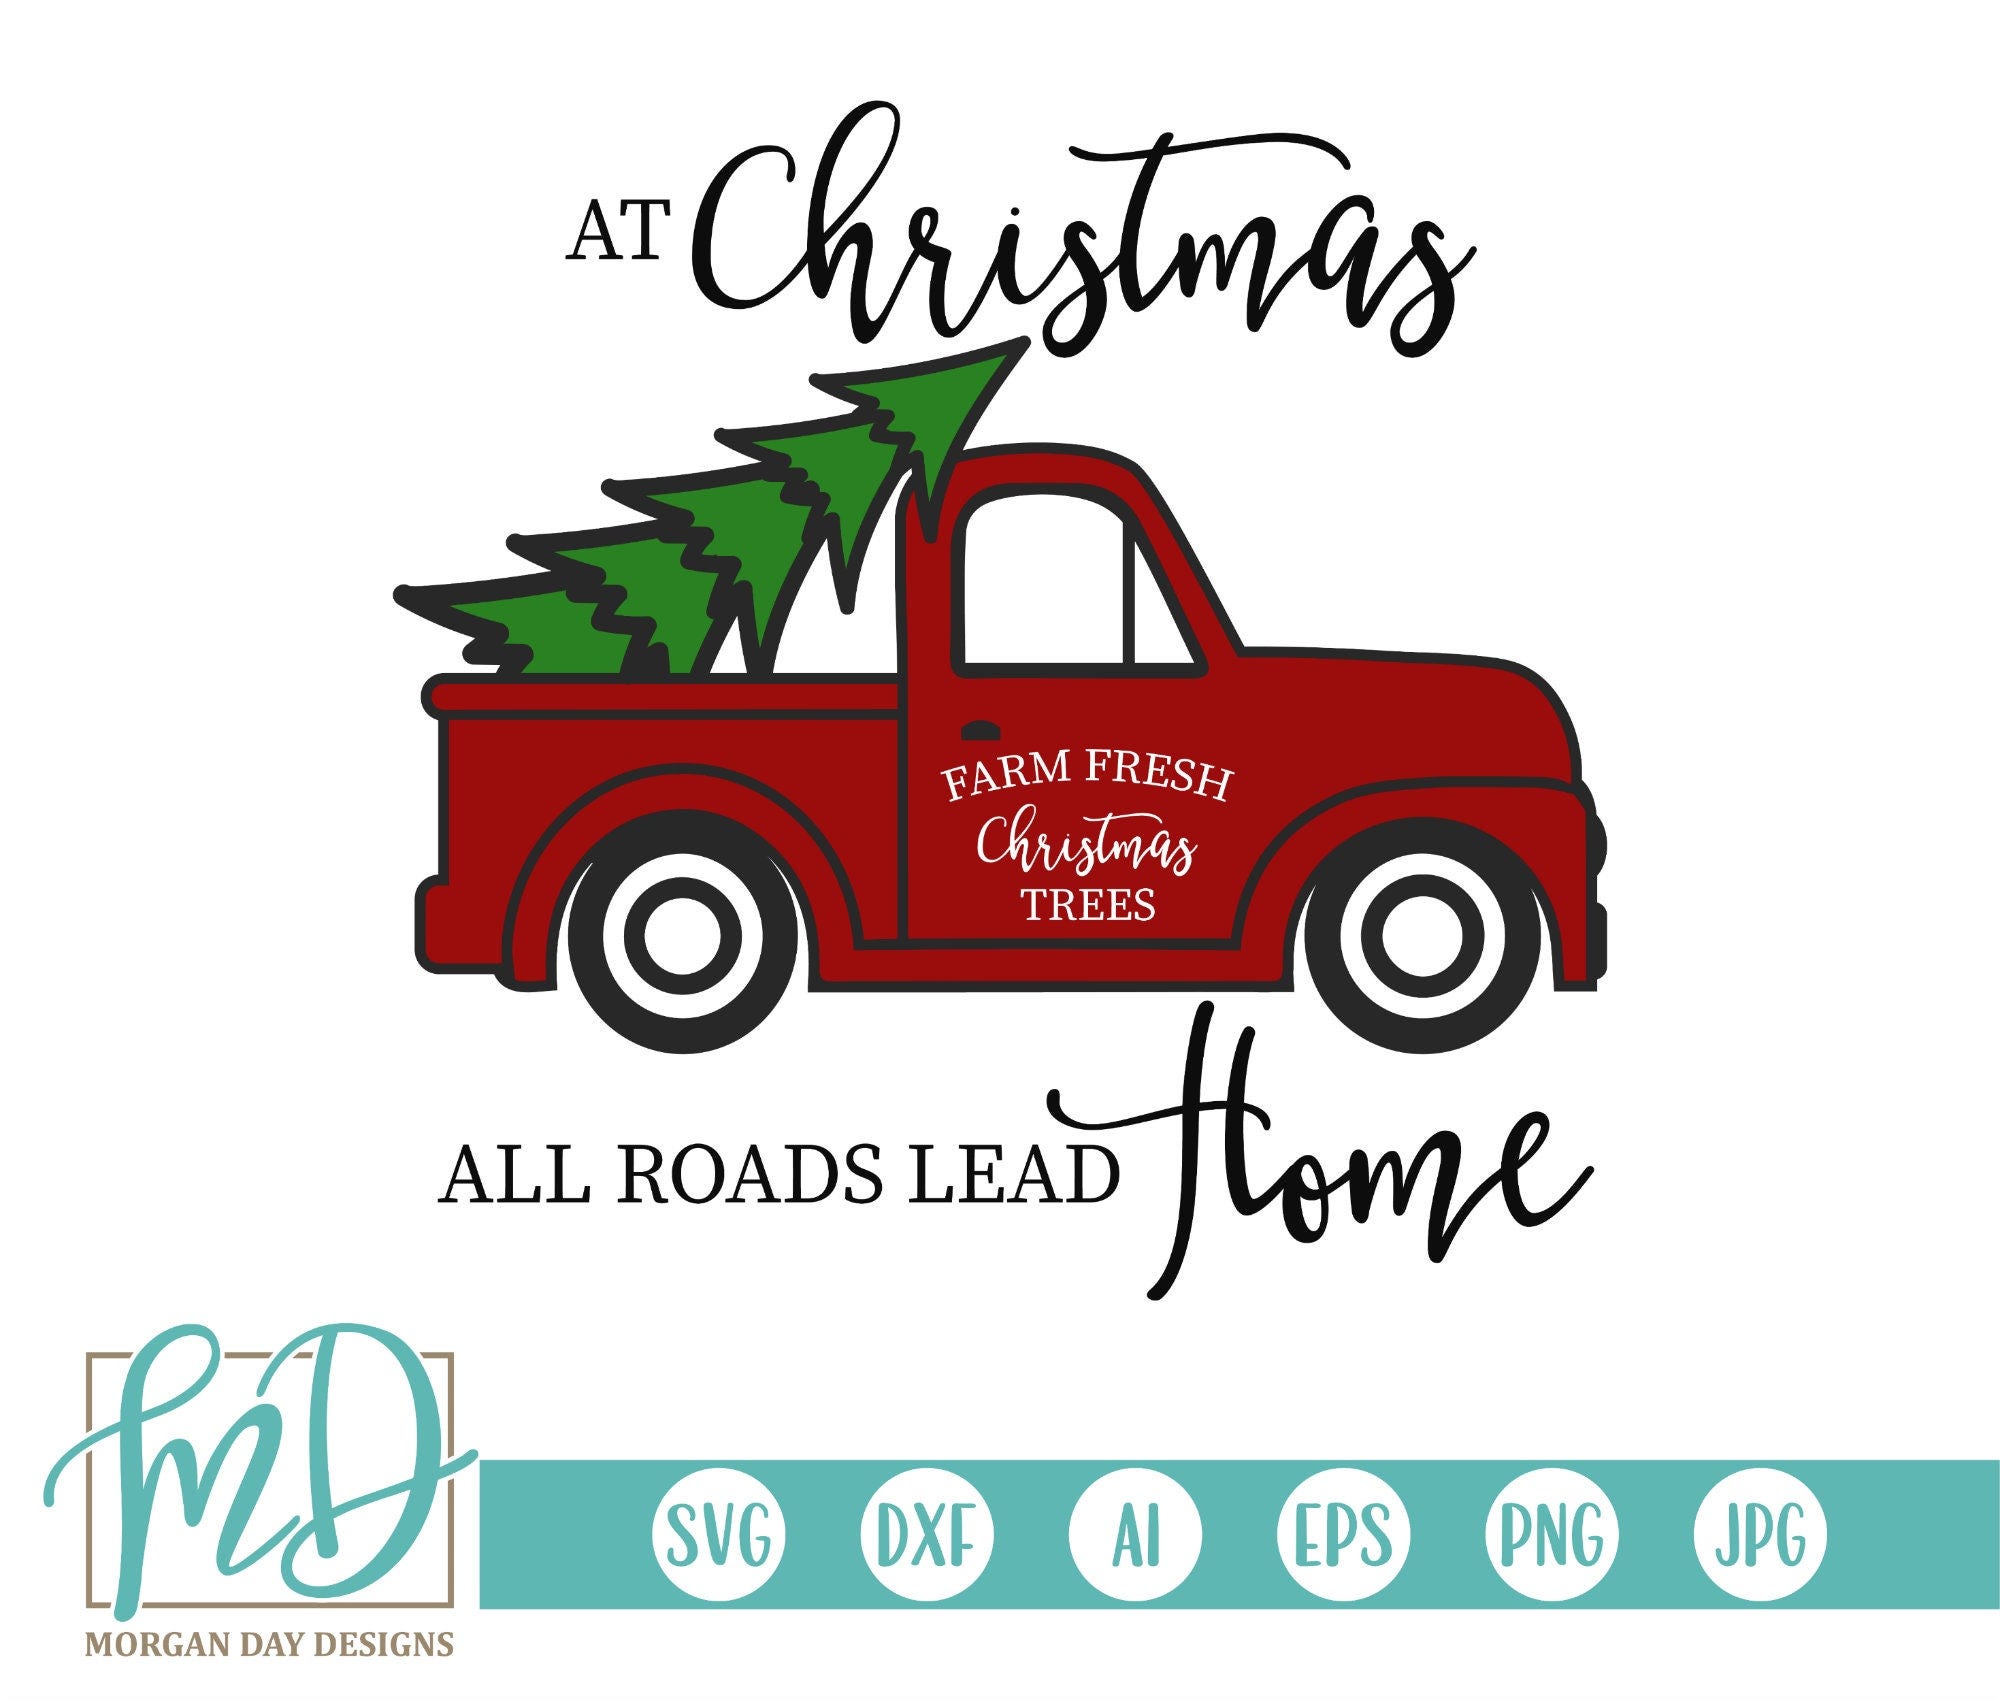 Christmas Truck SVG, At Christmas All Roads Lead Home SVG, Christmas Tree SVG, Christmas svg, Christmas Cut File, Vintage Truck svg, Pillow